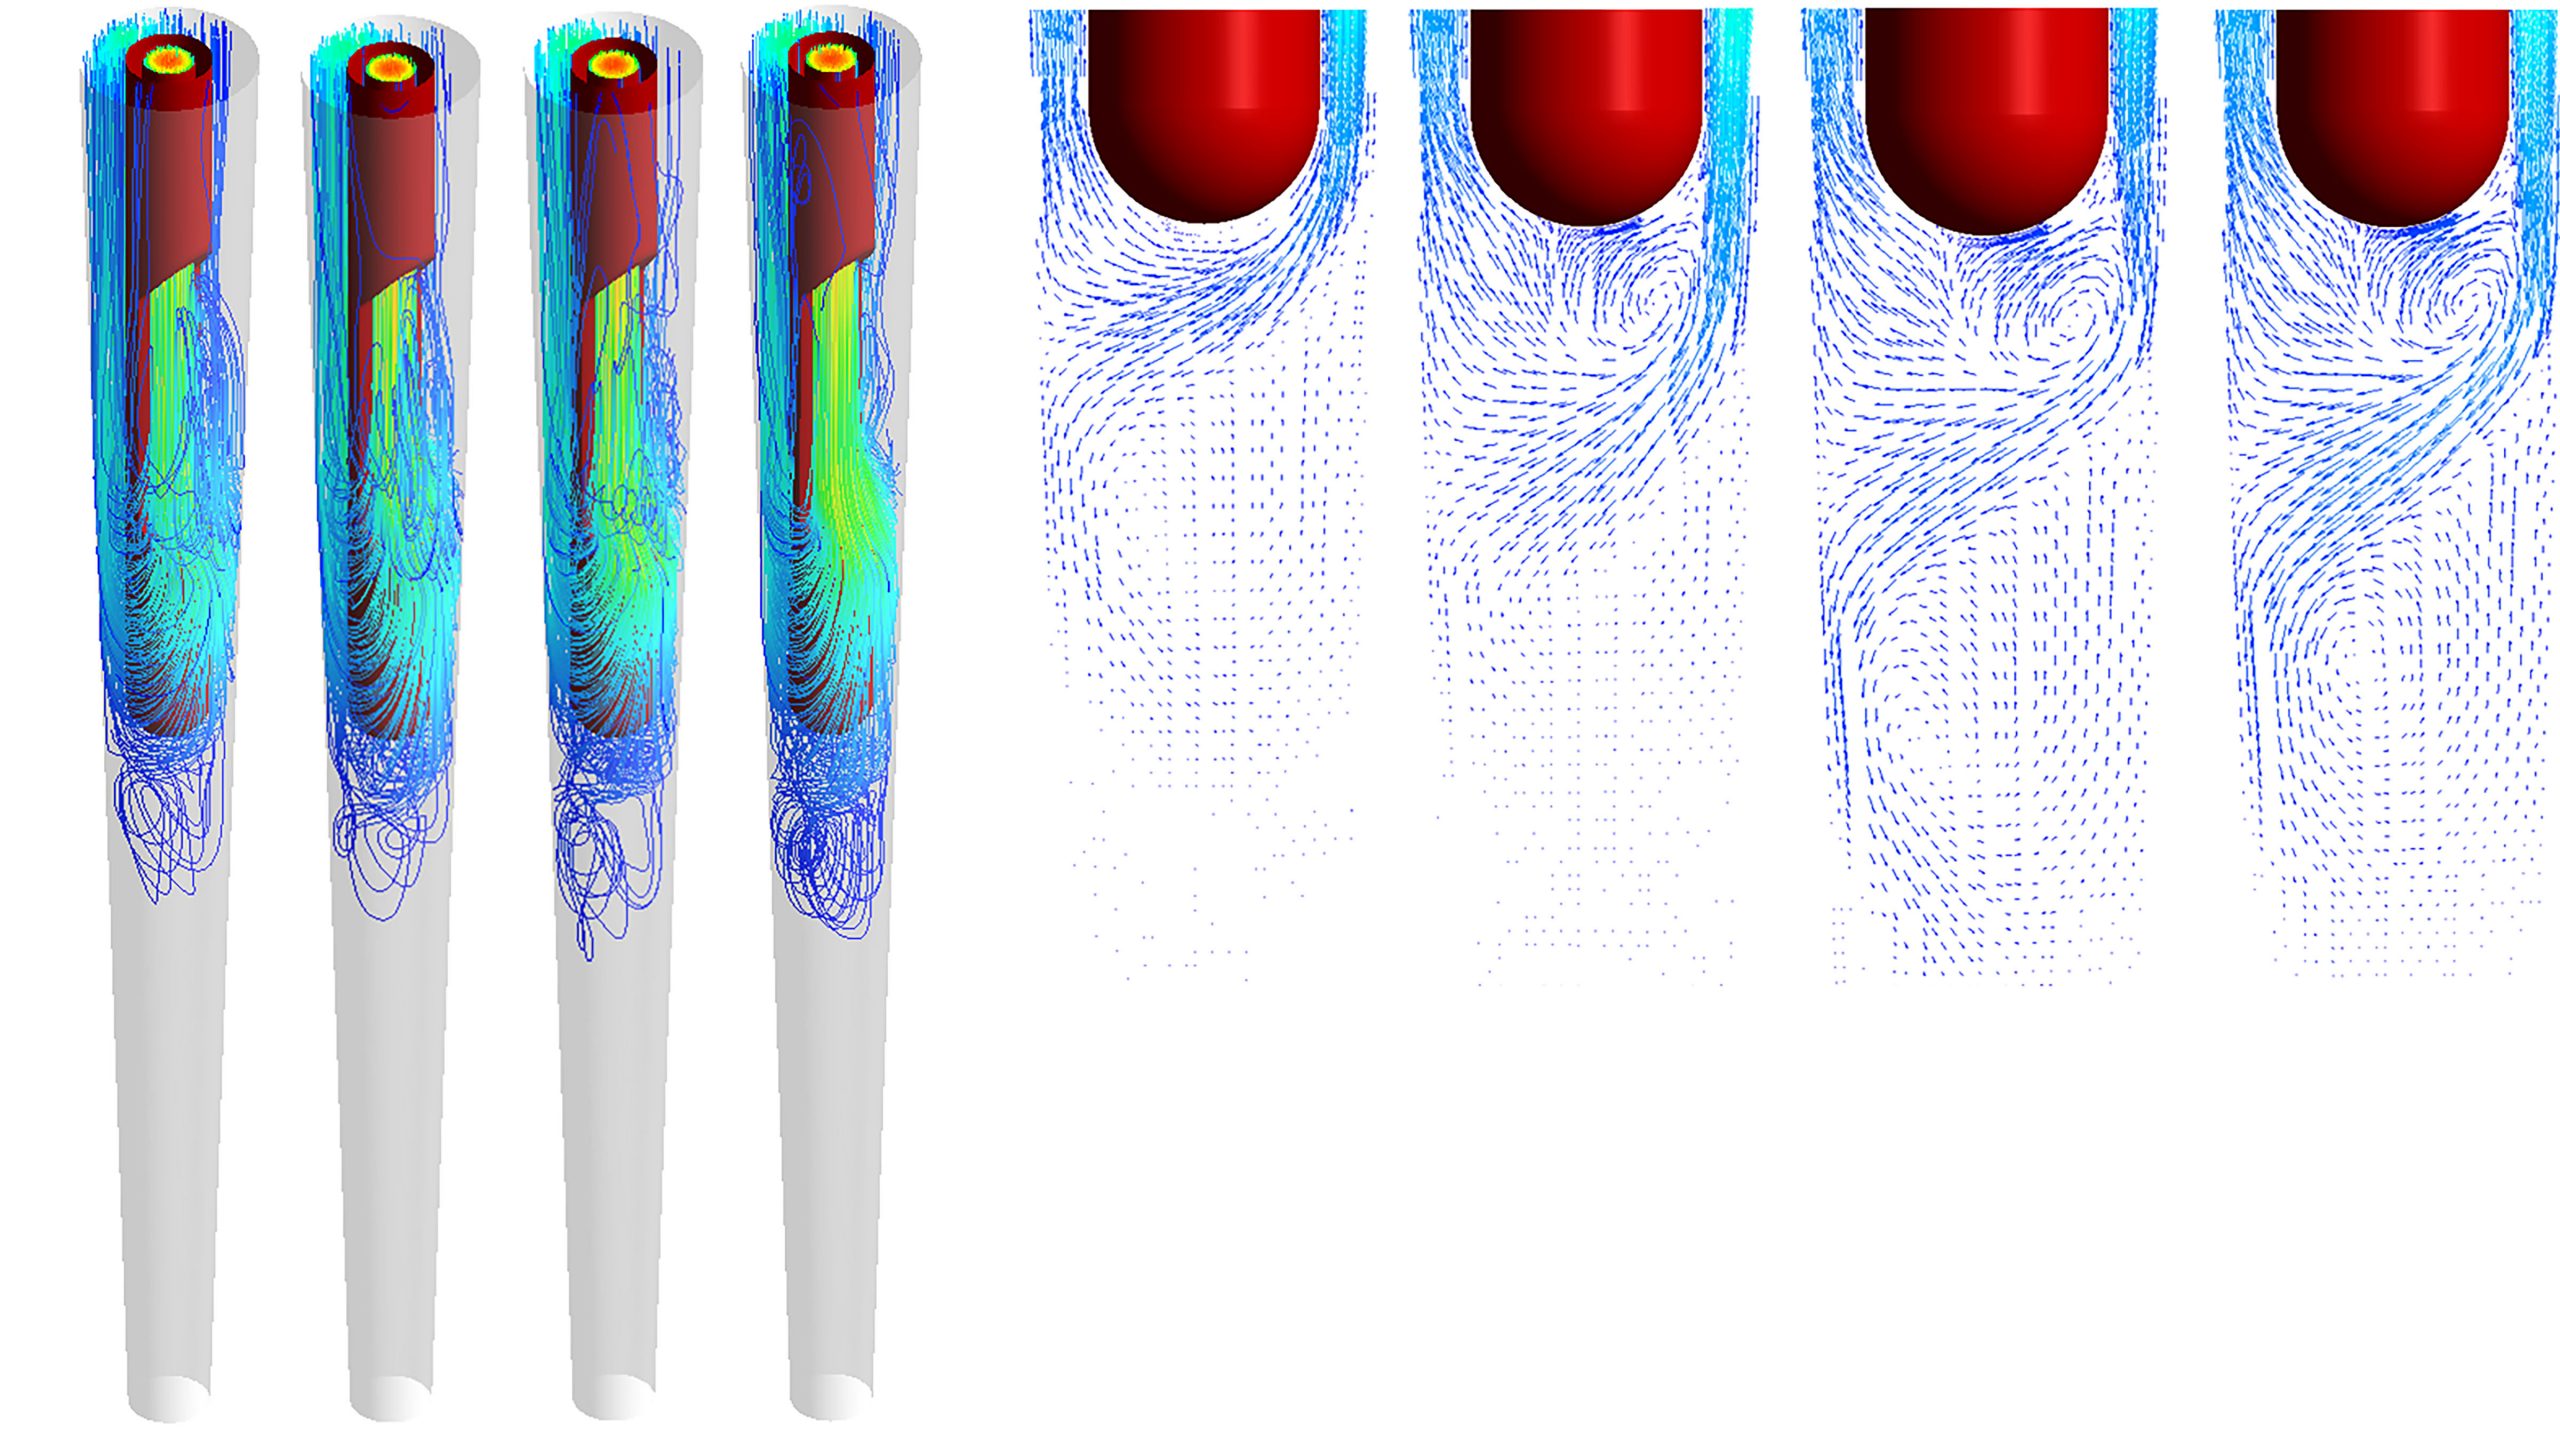 Newswise: Using Physics to Improve Root Canal Efficiency